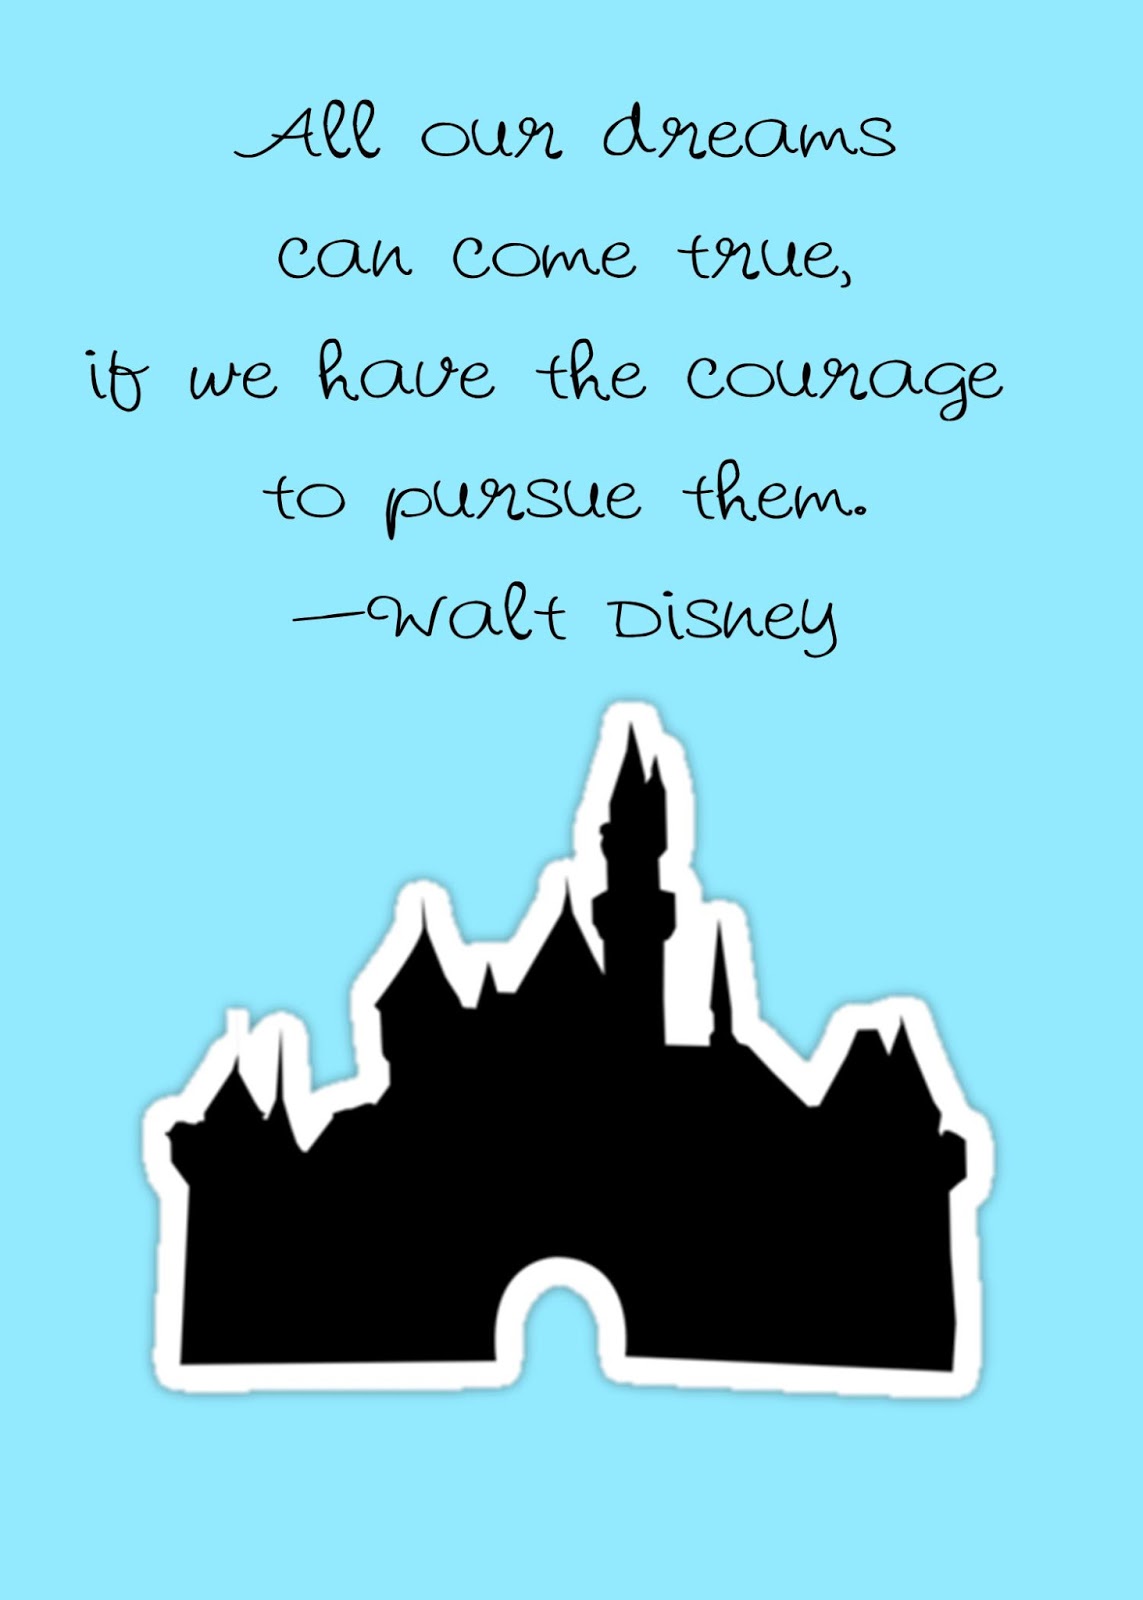 Mickey Mouse Quotes And Sayings. QuotesGram